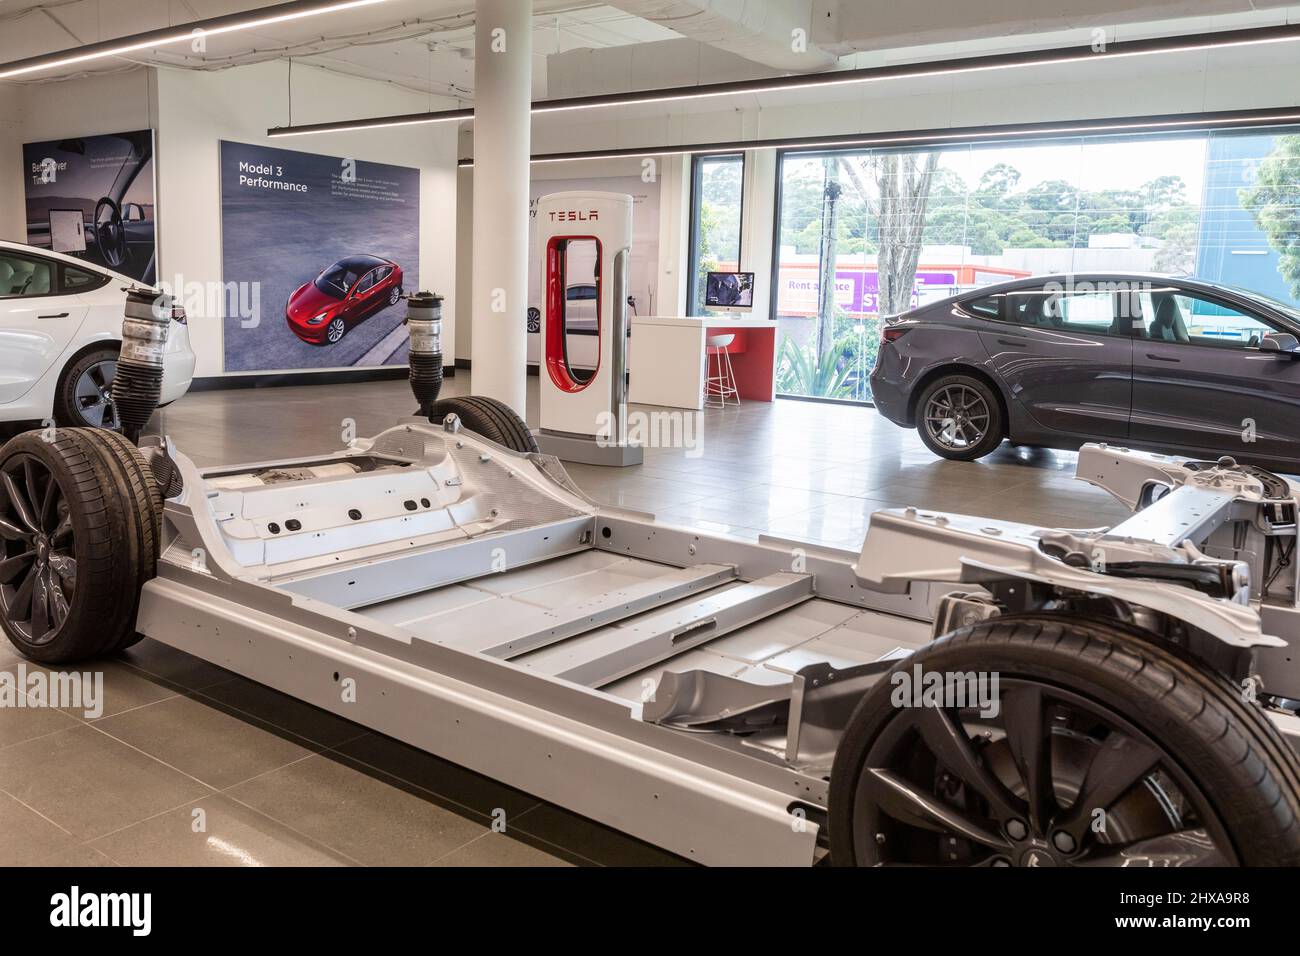 2022 Tesla model 3 in tesla showroom Sydney with car chassis also in the showroom,Sydney,Australia Stock Photo